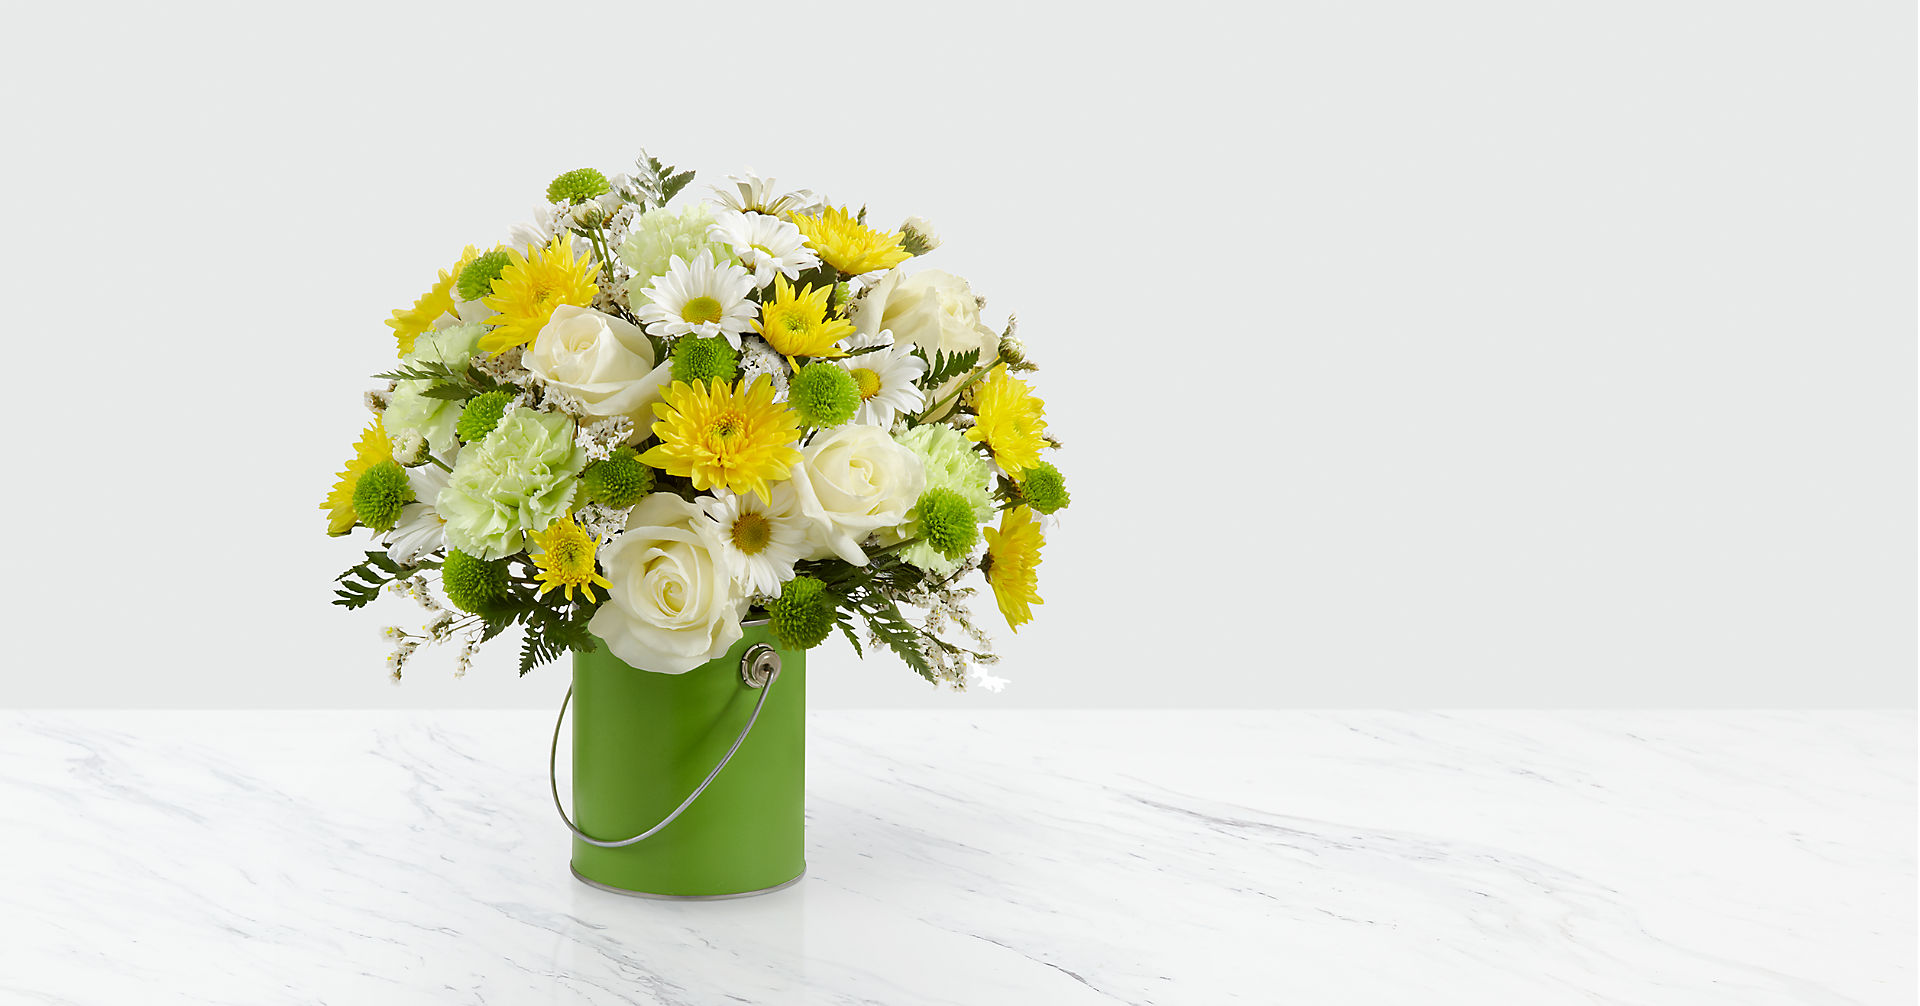 The Color Your Day With Joy™ Bouquet Flower Bouquet